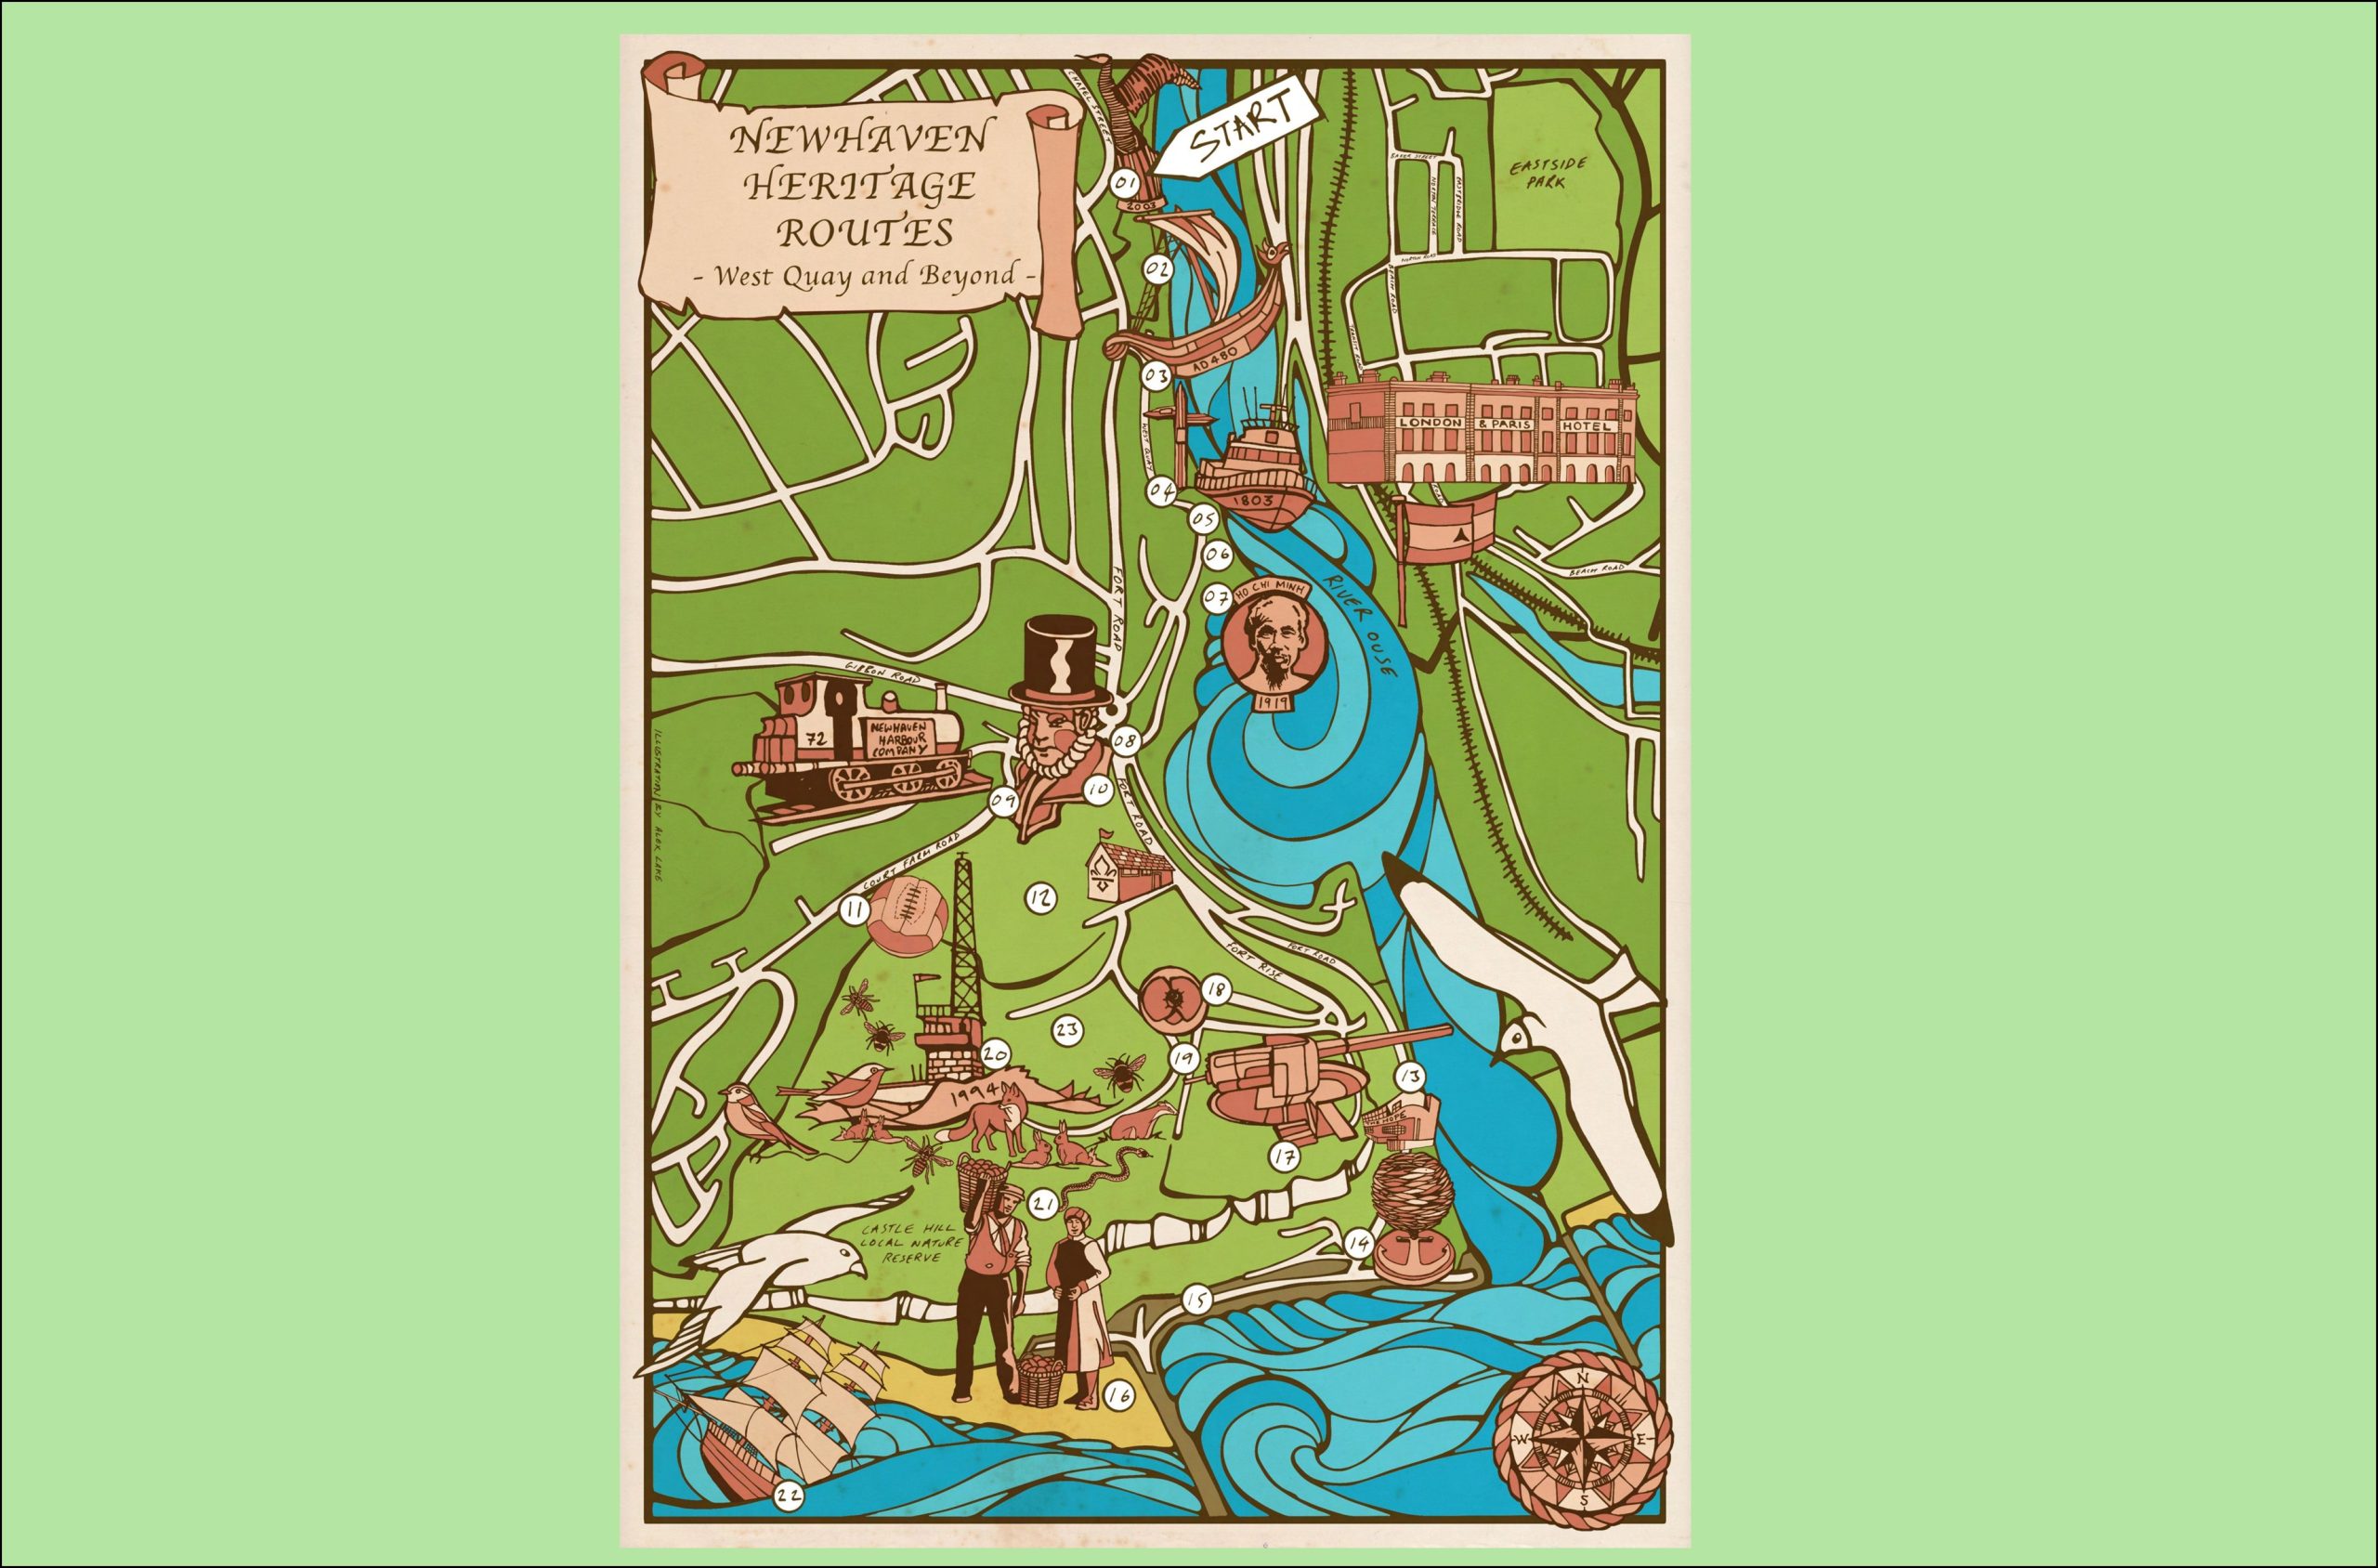 Newhaven heritage walking routes published